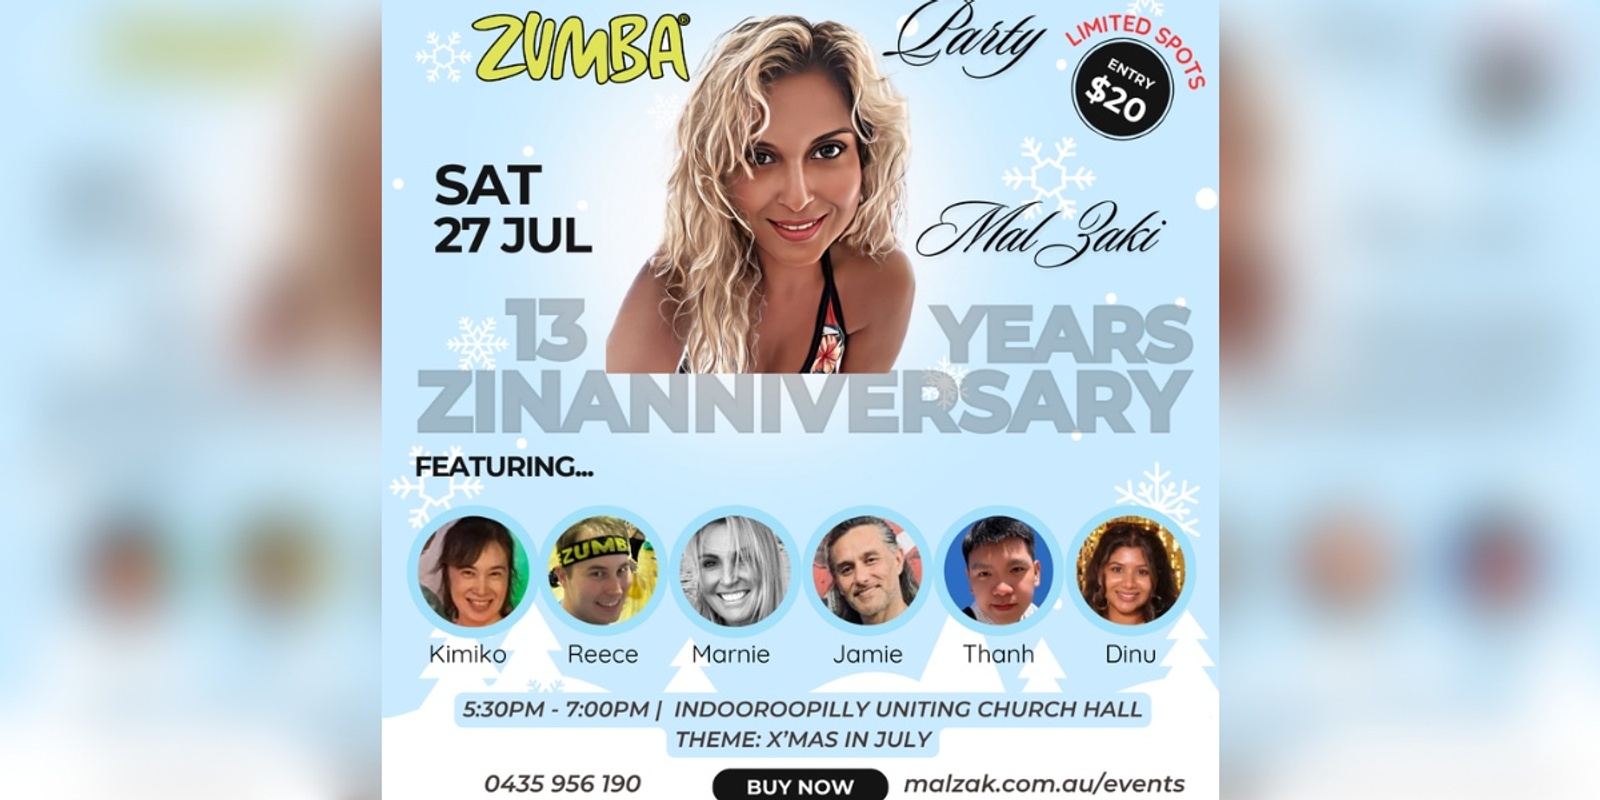 Banner image for ZUMBA Party Xmas in July - 13 years ZINanniversary with Mal Zaki & Guest Instructors, Sat 27 July